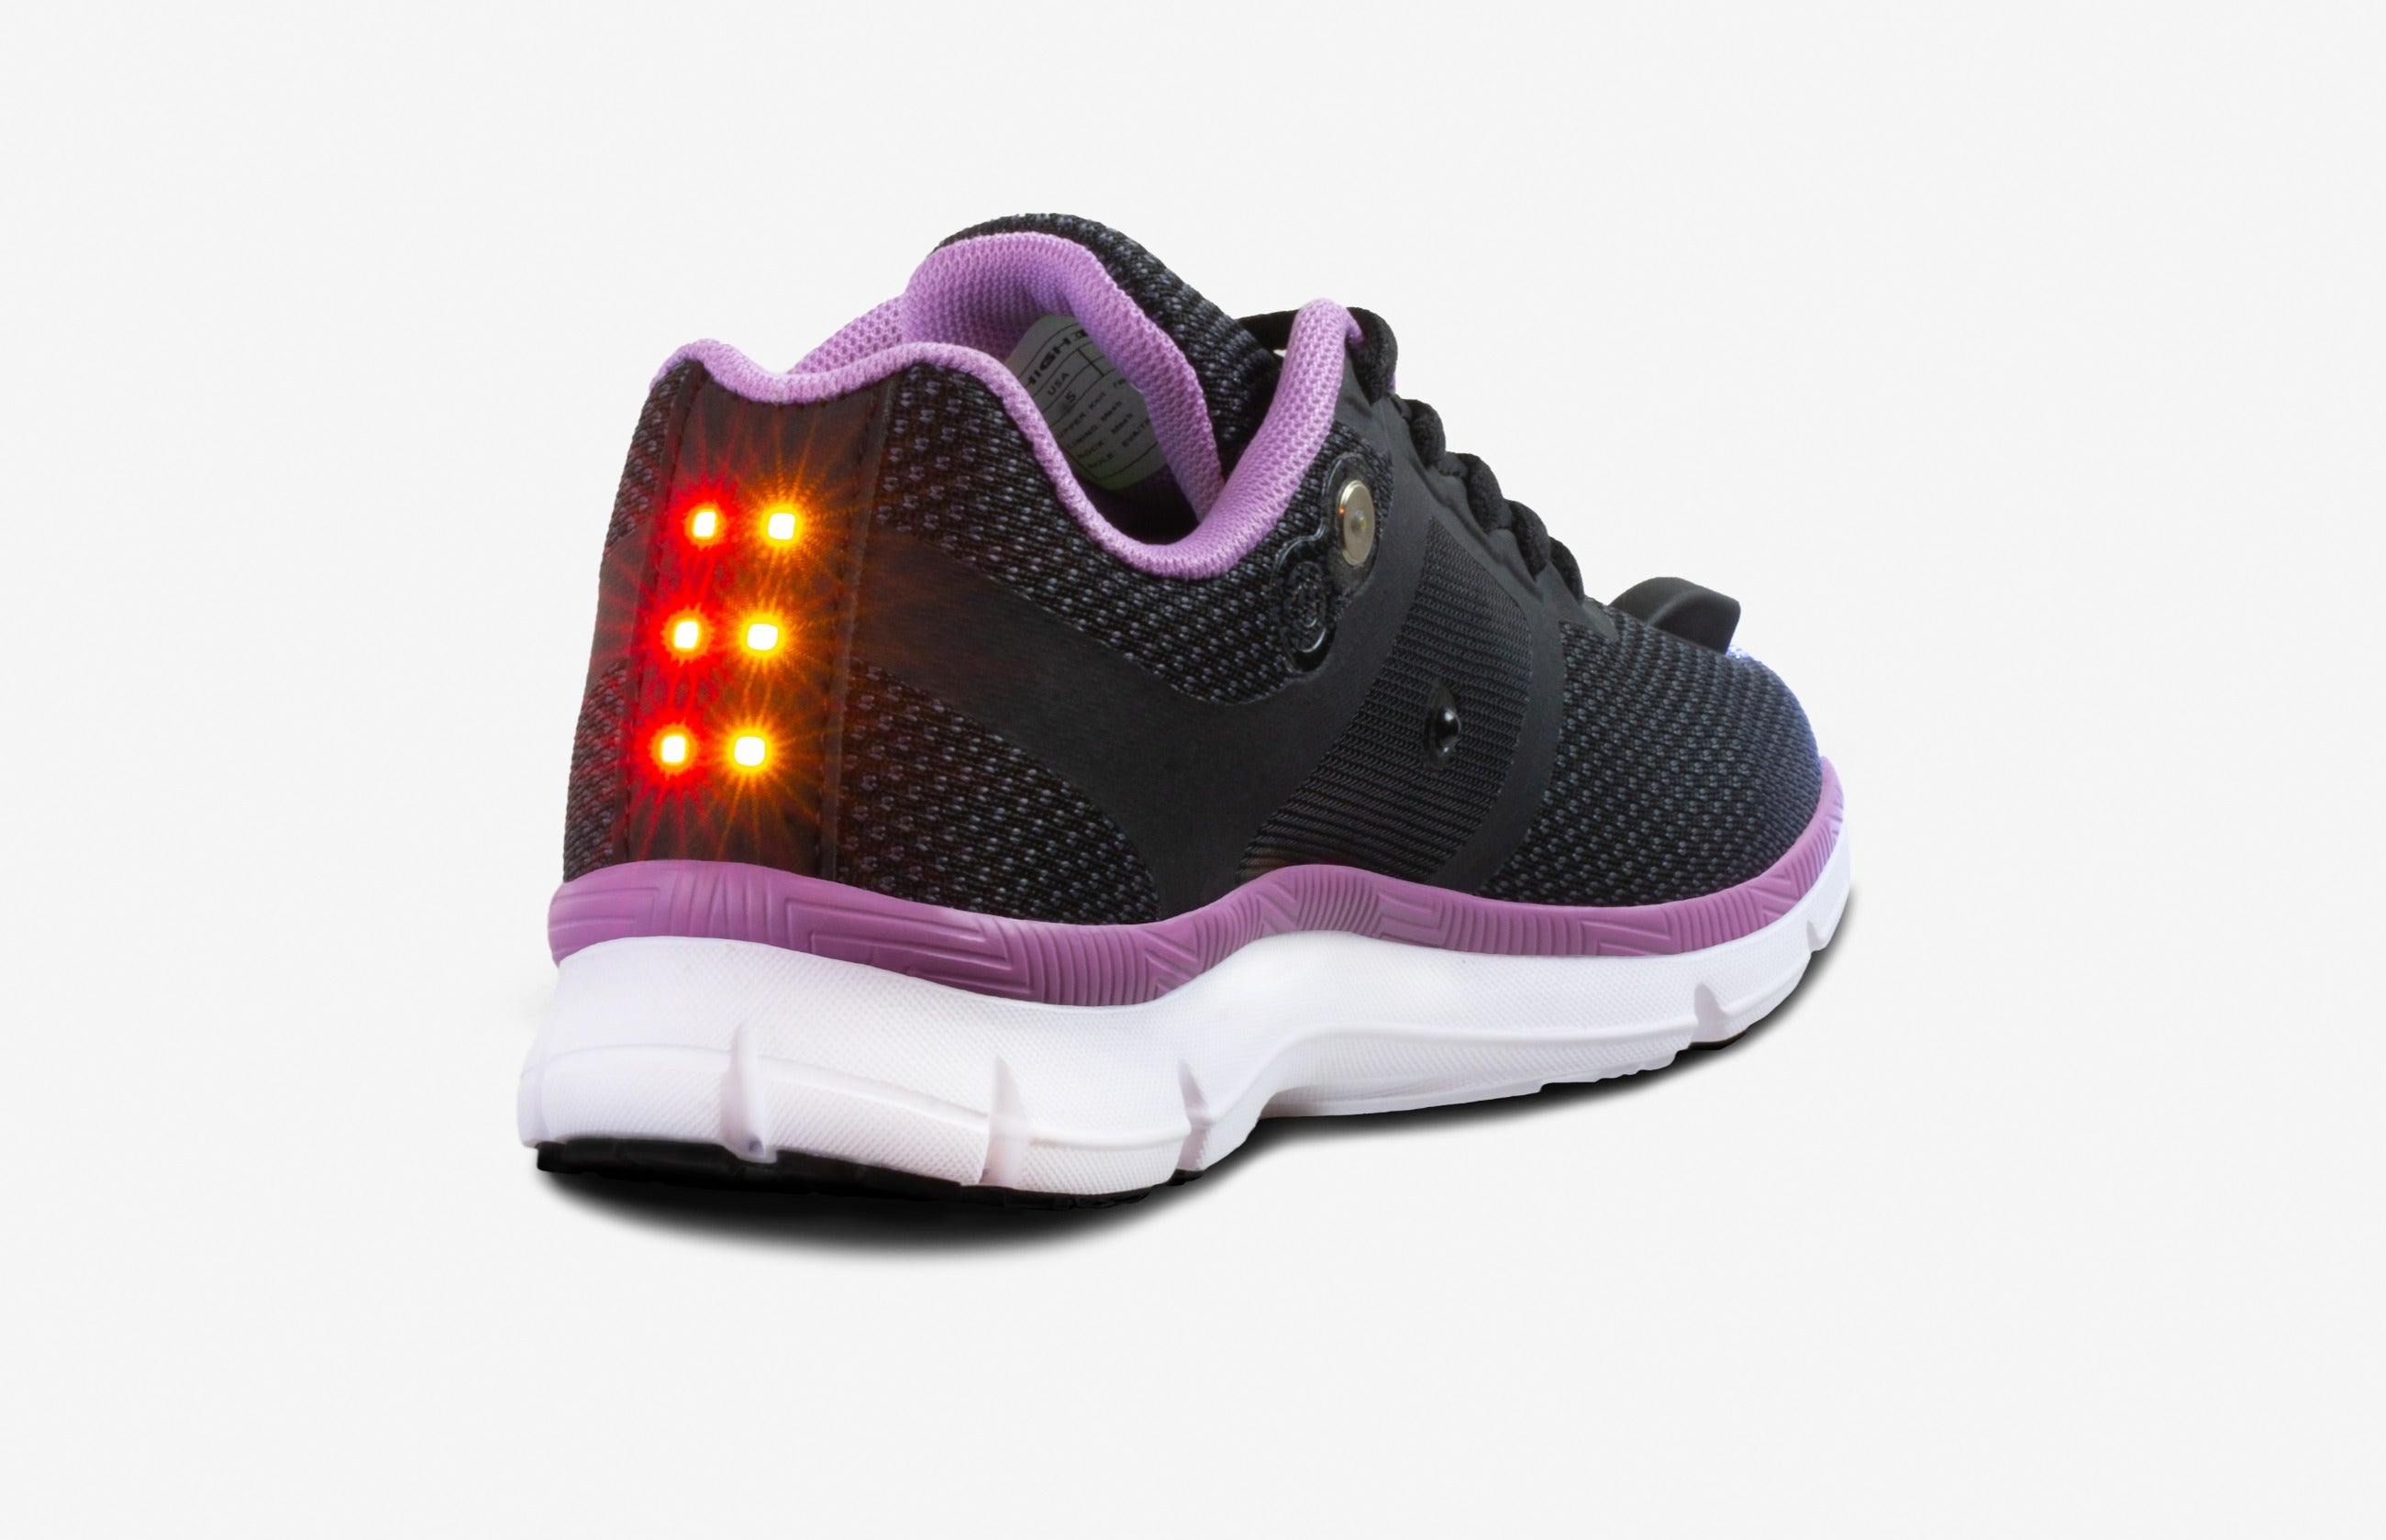 Women's Night Runner Shoes With Built-in Safety Lights - data_098790bb-5959-4a95-a0a7-1c81af8fce4b